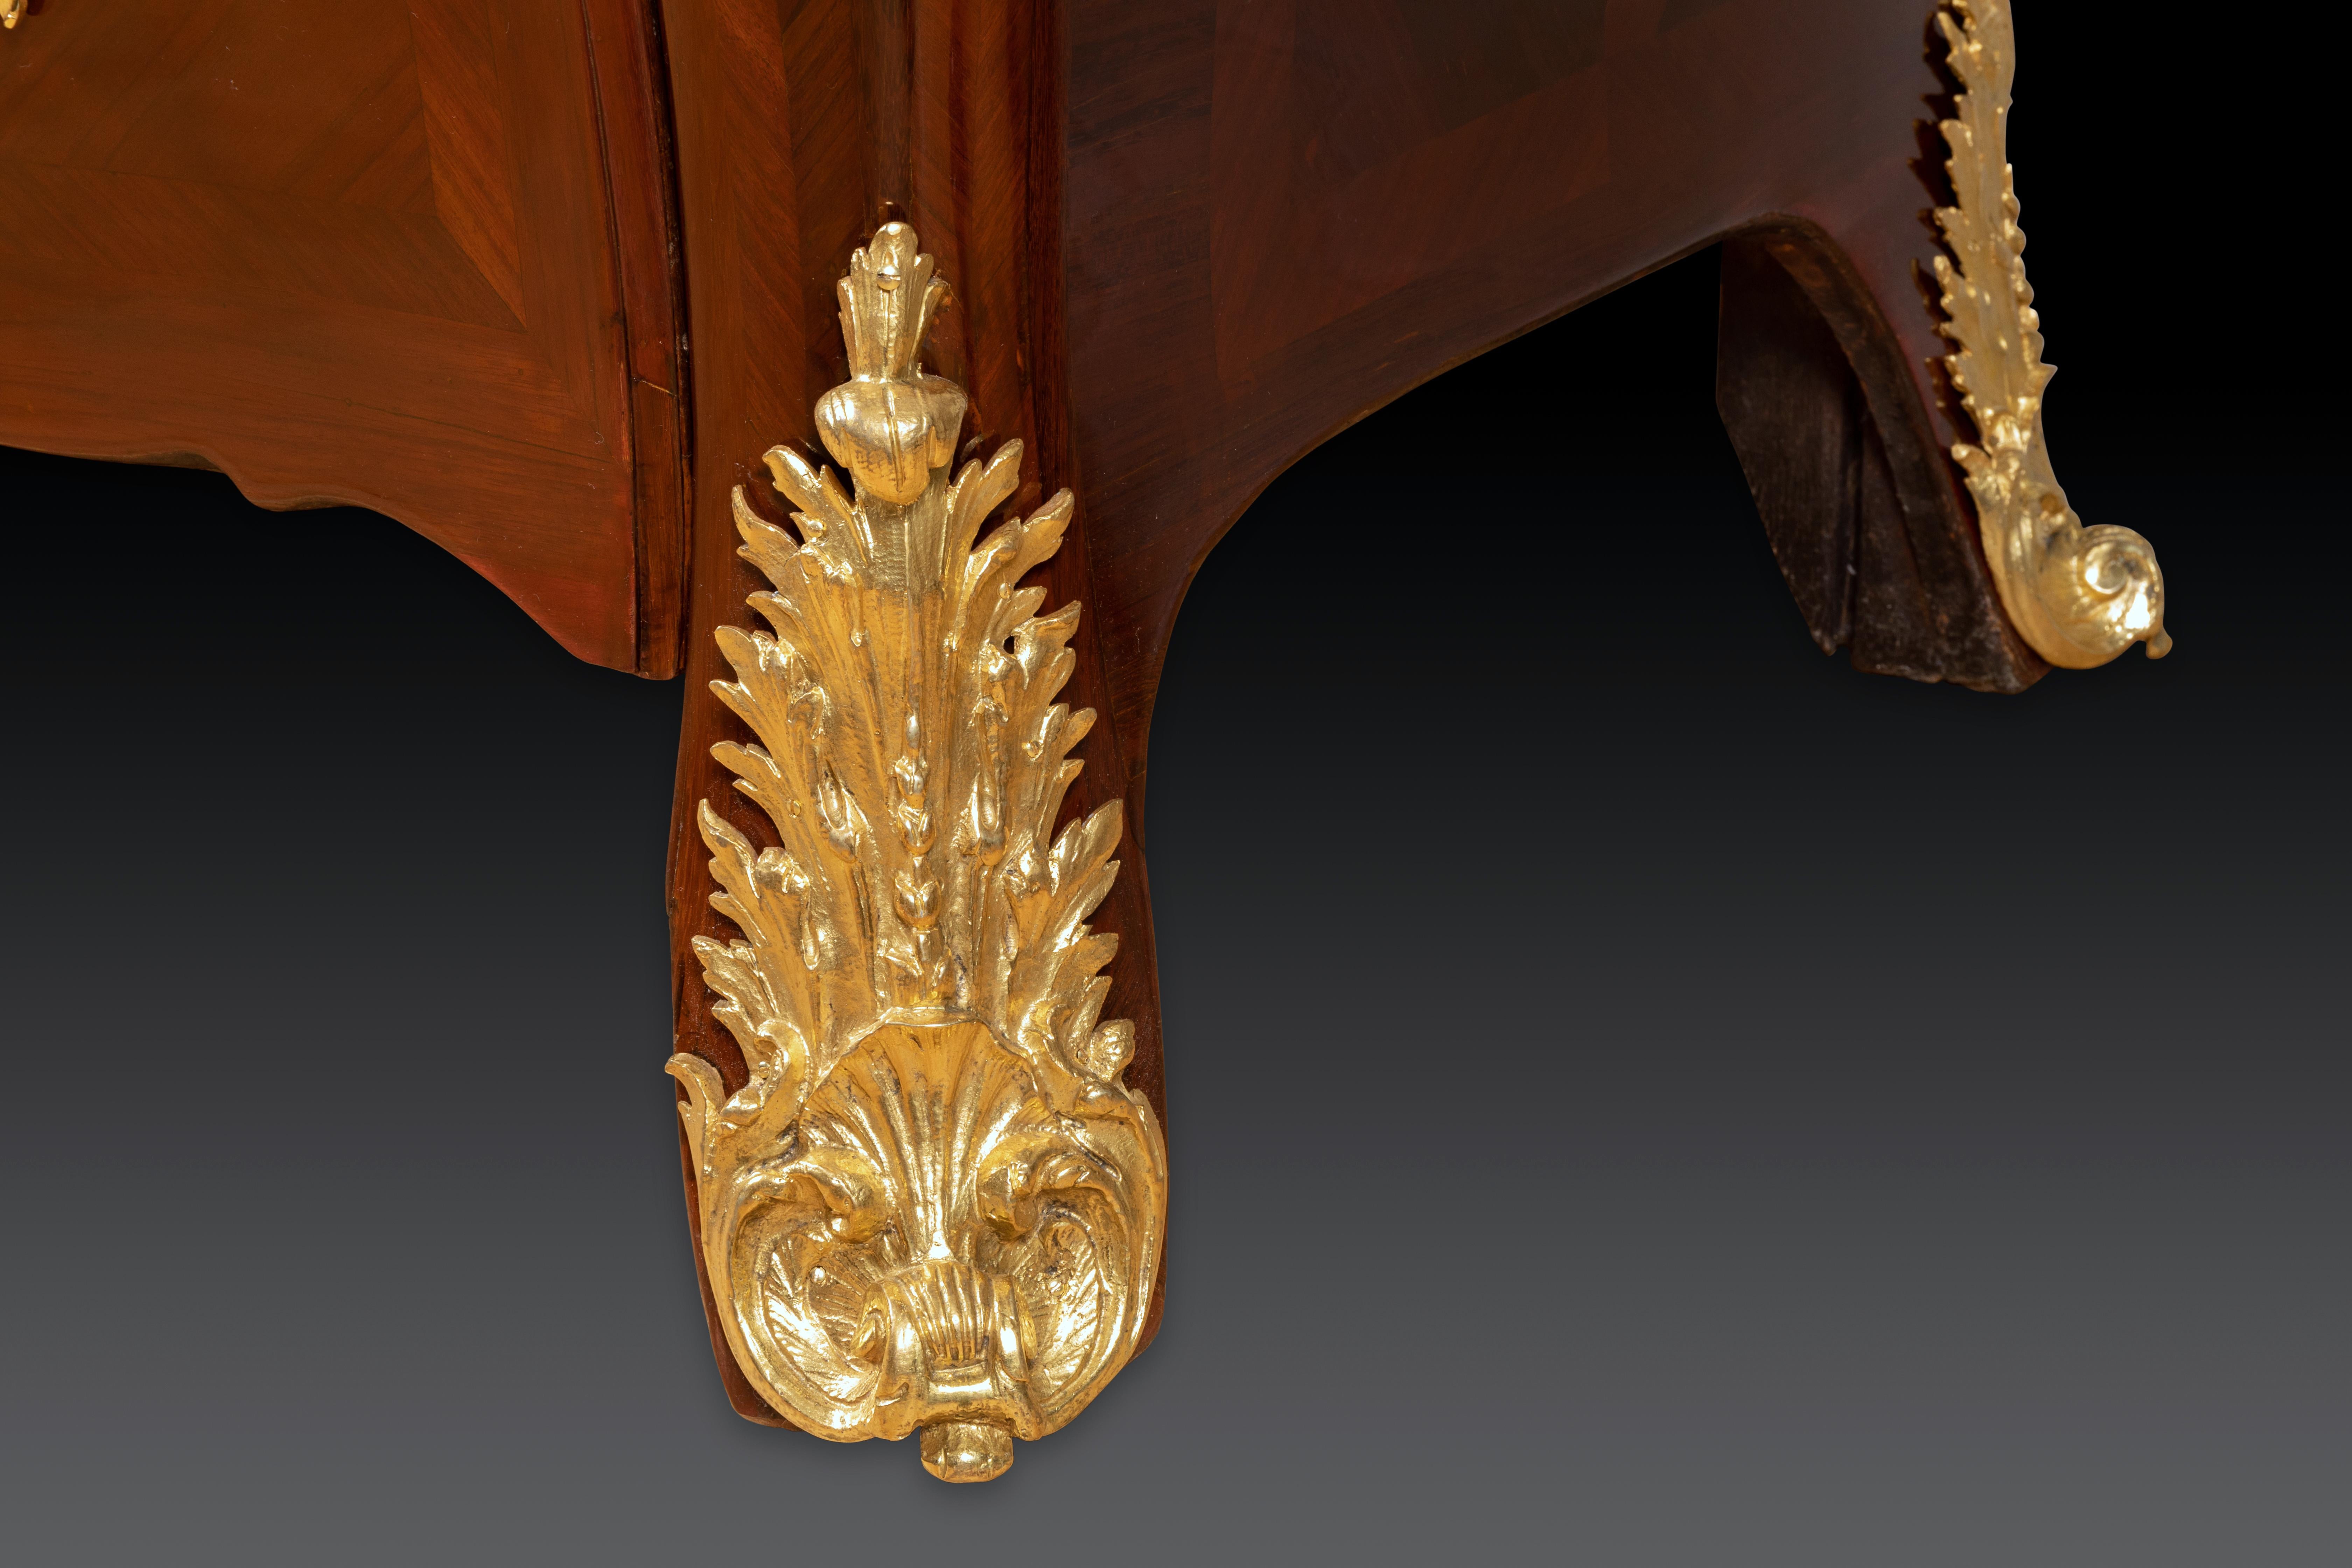 Bronze French 18th Century Regence Ormolu-Mounted Commode by Etienne Doirat For Sale